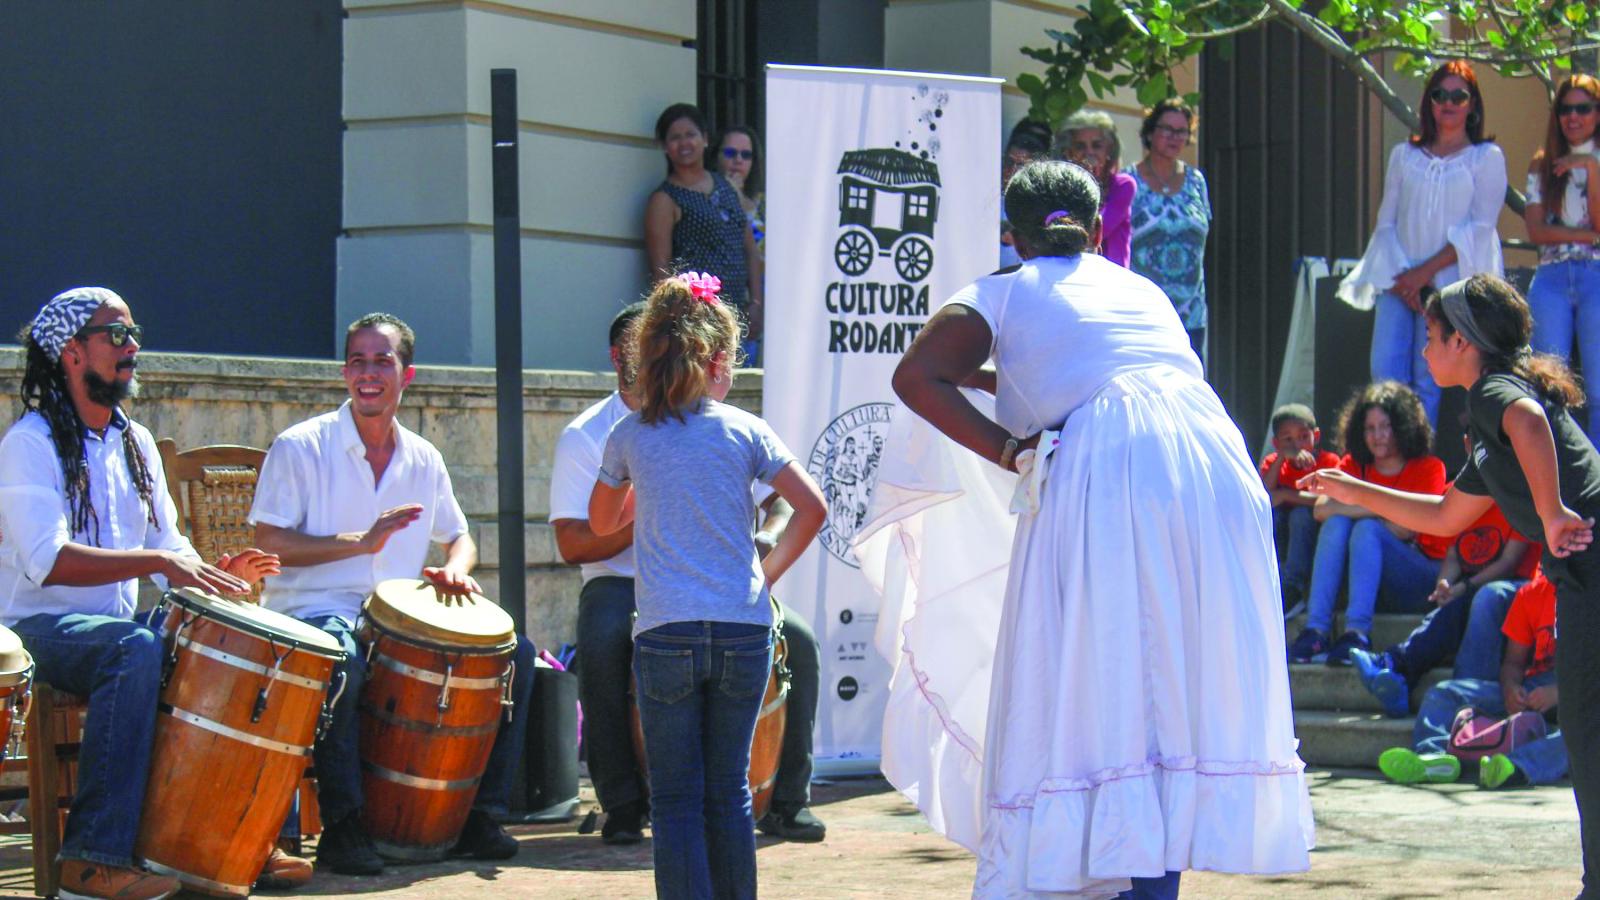 Woman in white dress teaching children to dance outdoors, with men playing drums in background.